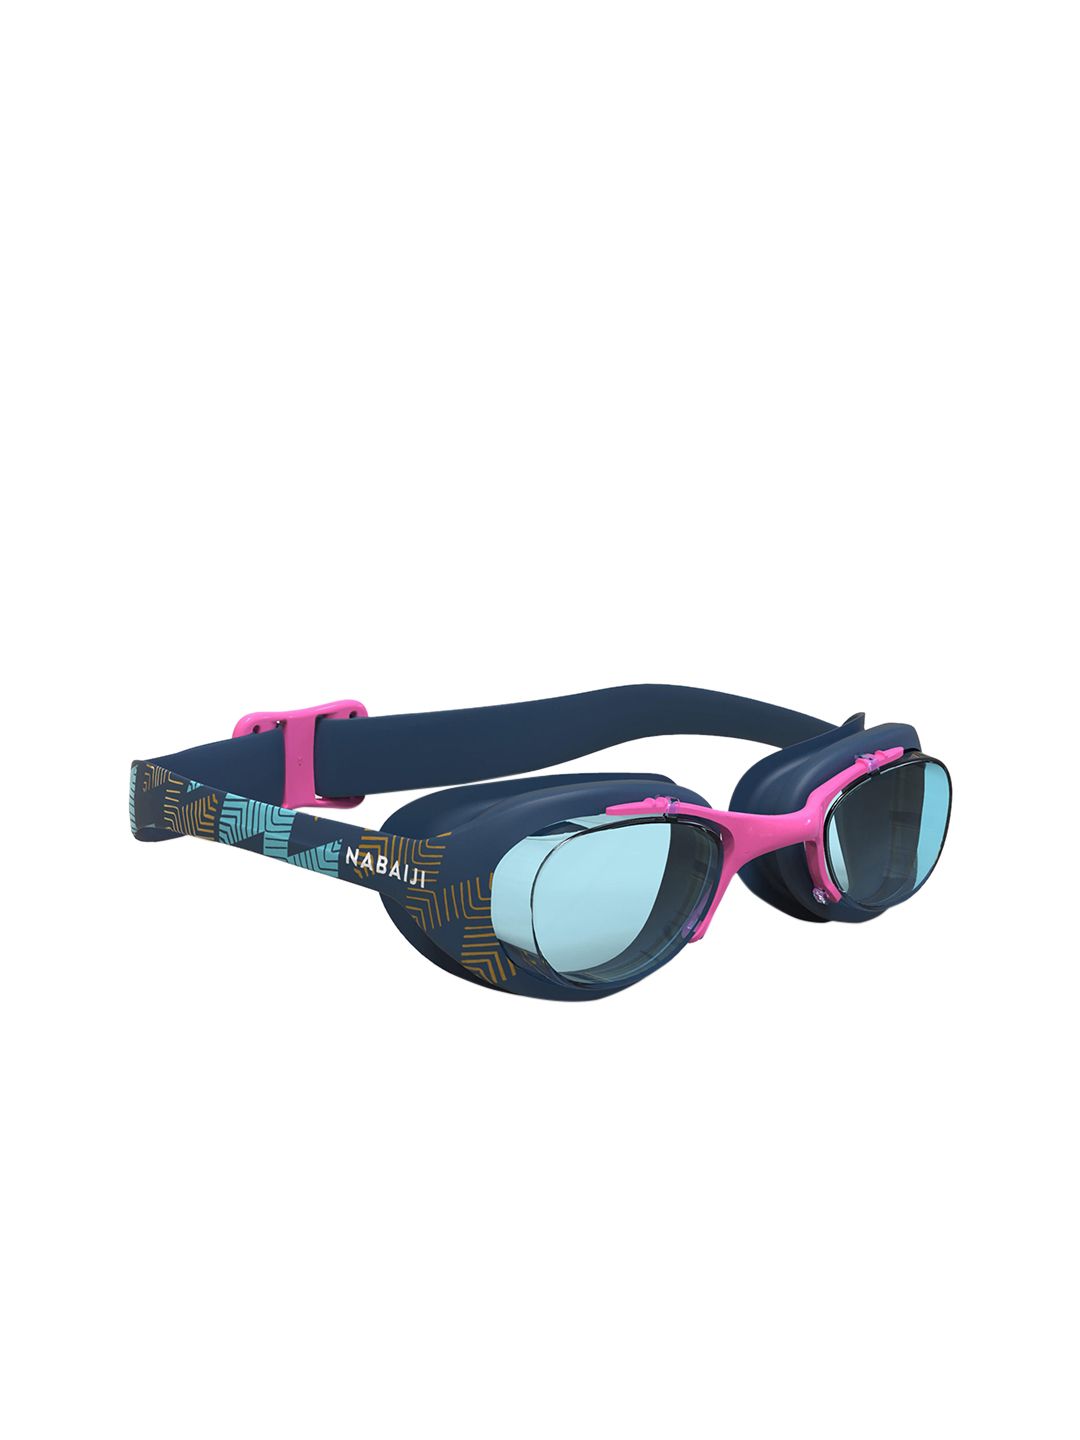 Nabaiji By Decathlon Pink & GoldX Base Swimming Goggles Price in India